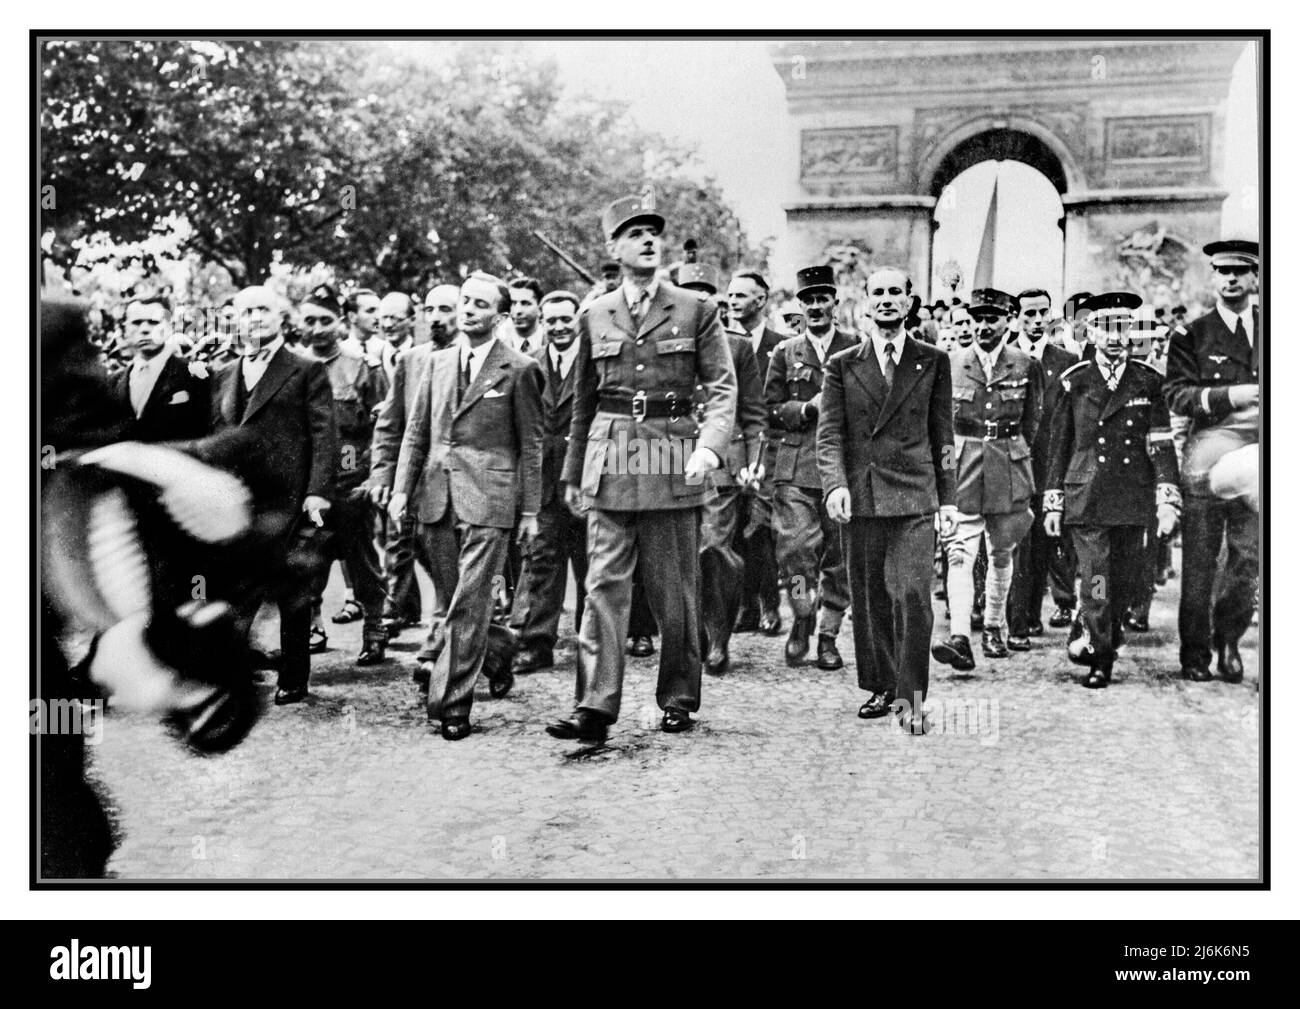 The Liberation of Paris, 25 - 26 August 1944 WW2 VE Day General Charles de Gaulle and his entourage of dignitaries set off from the Arc de Triumphe down the Champs Elysees to Notre Dame for a service of thanksgiving following the city's liberation in August 1944. Restored and  enhanced to reveal original quality) Stock Photo